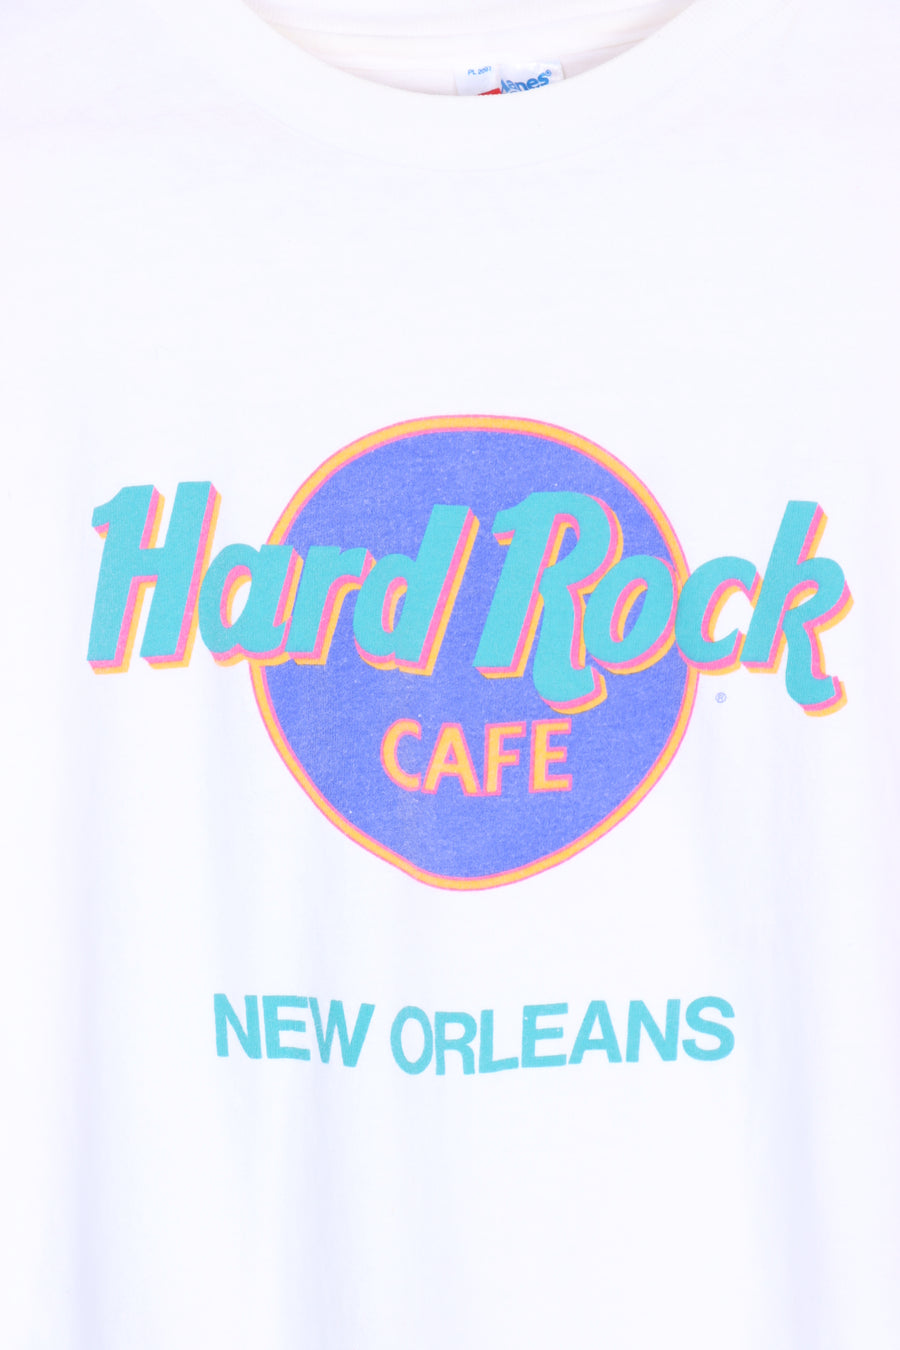 HARD ROCK CAFE New Orleans Colourful Destination Tee (XL)